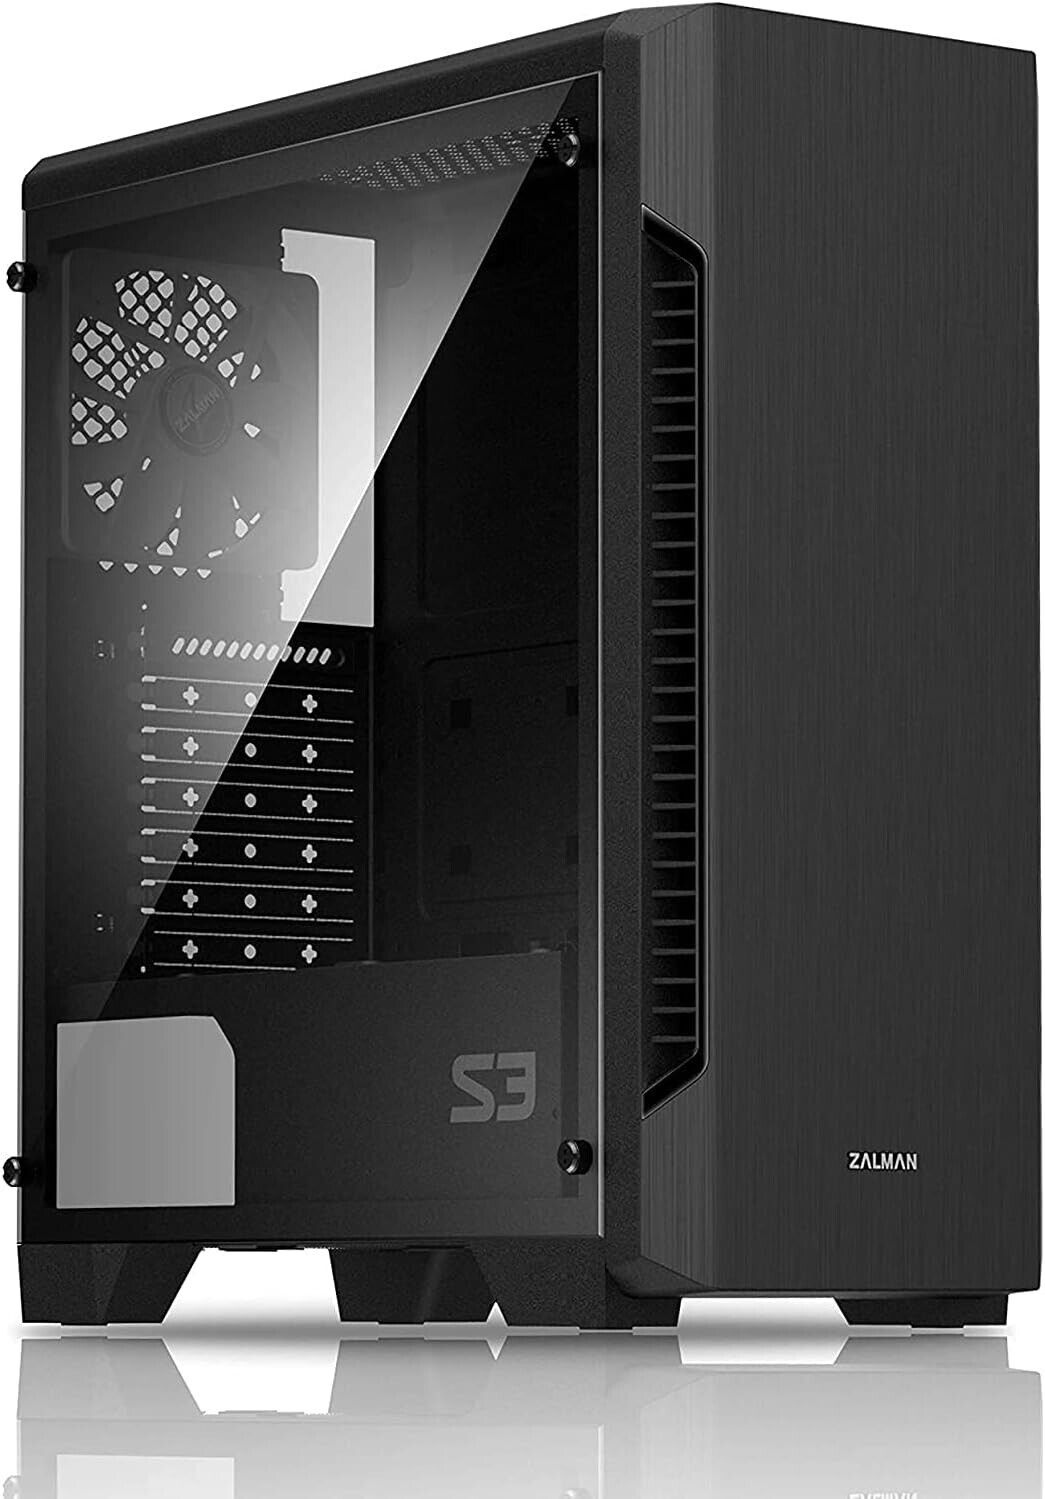 Zalman S3 TG ATX Mid Tower PC Case - Tempered Glass Side Panel (Open Box)